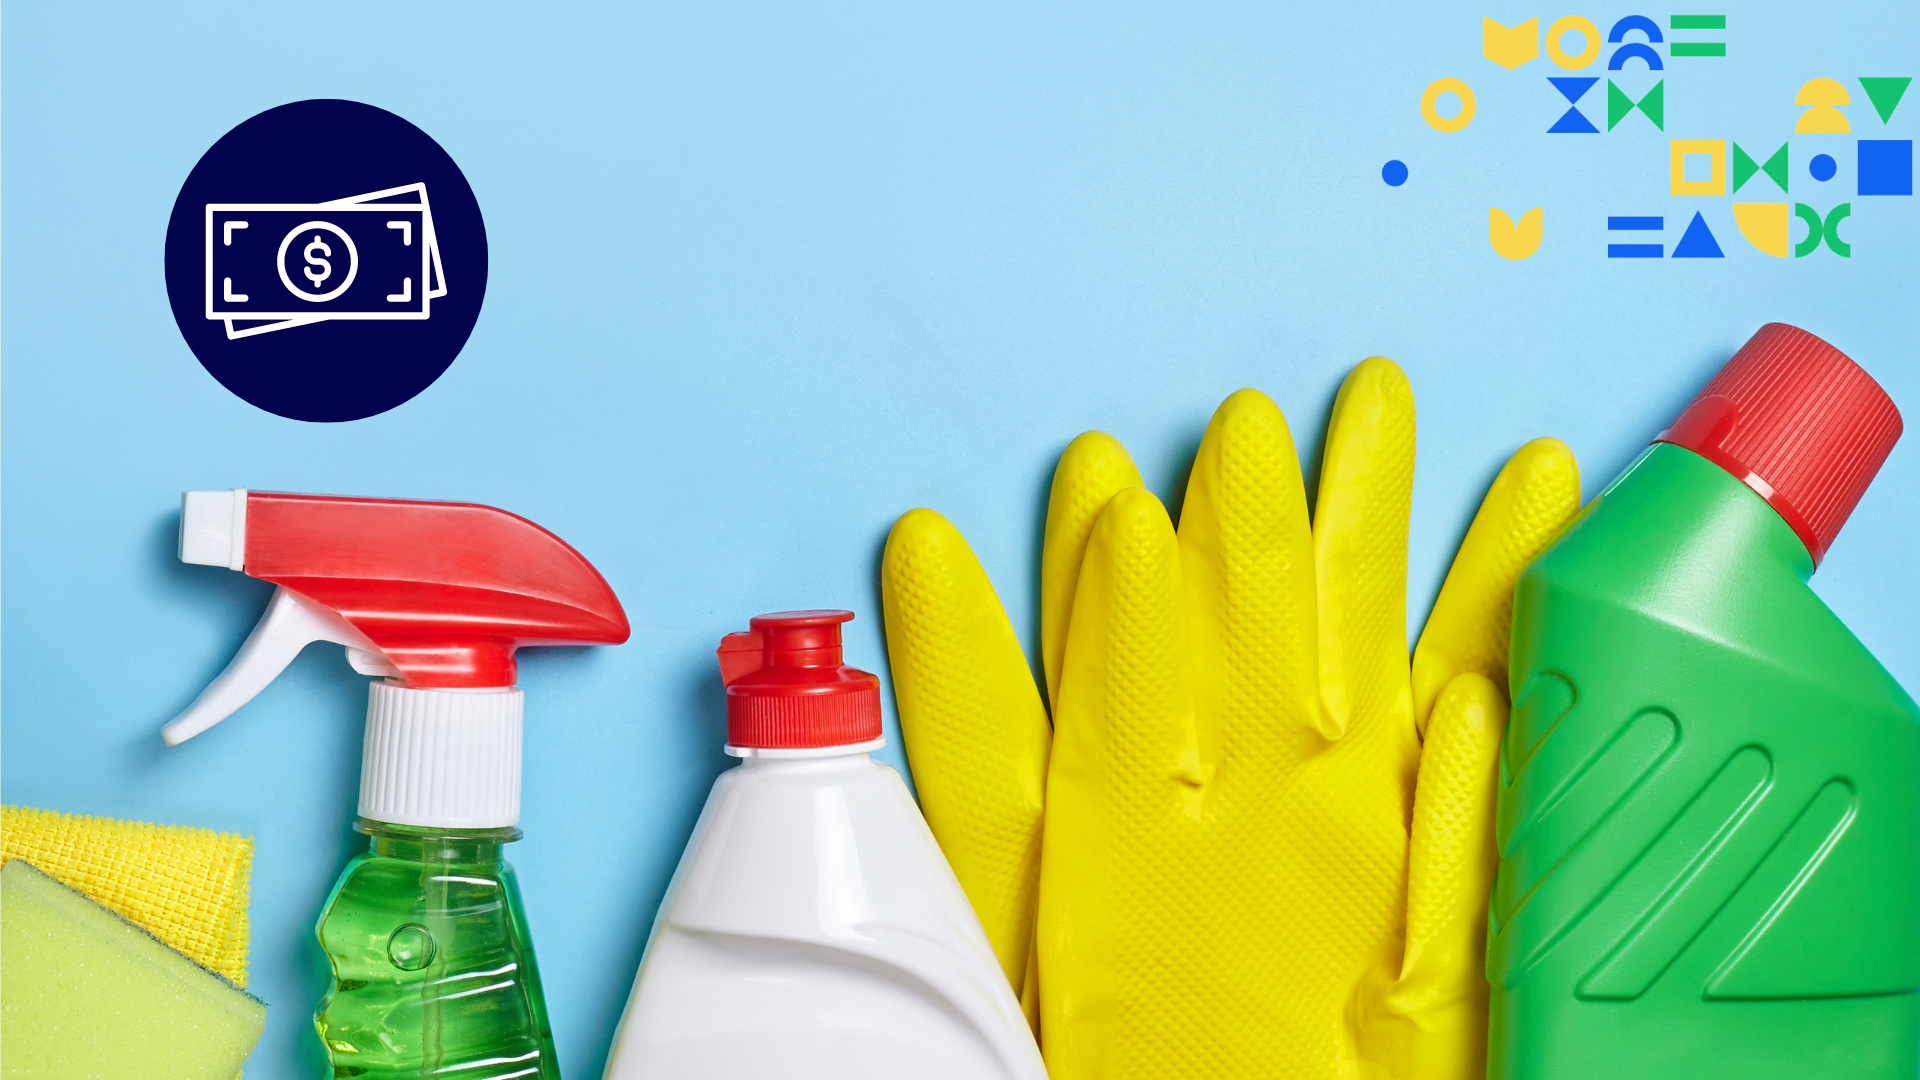 Image of cleaning products like sprays, dish gloves, towels on a blue background. The image has a graphic of a dollar bill on tip. 